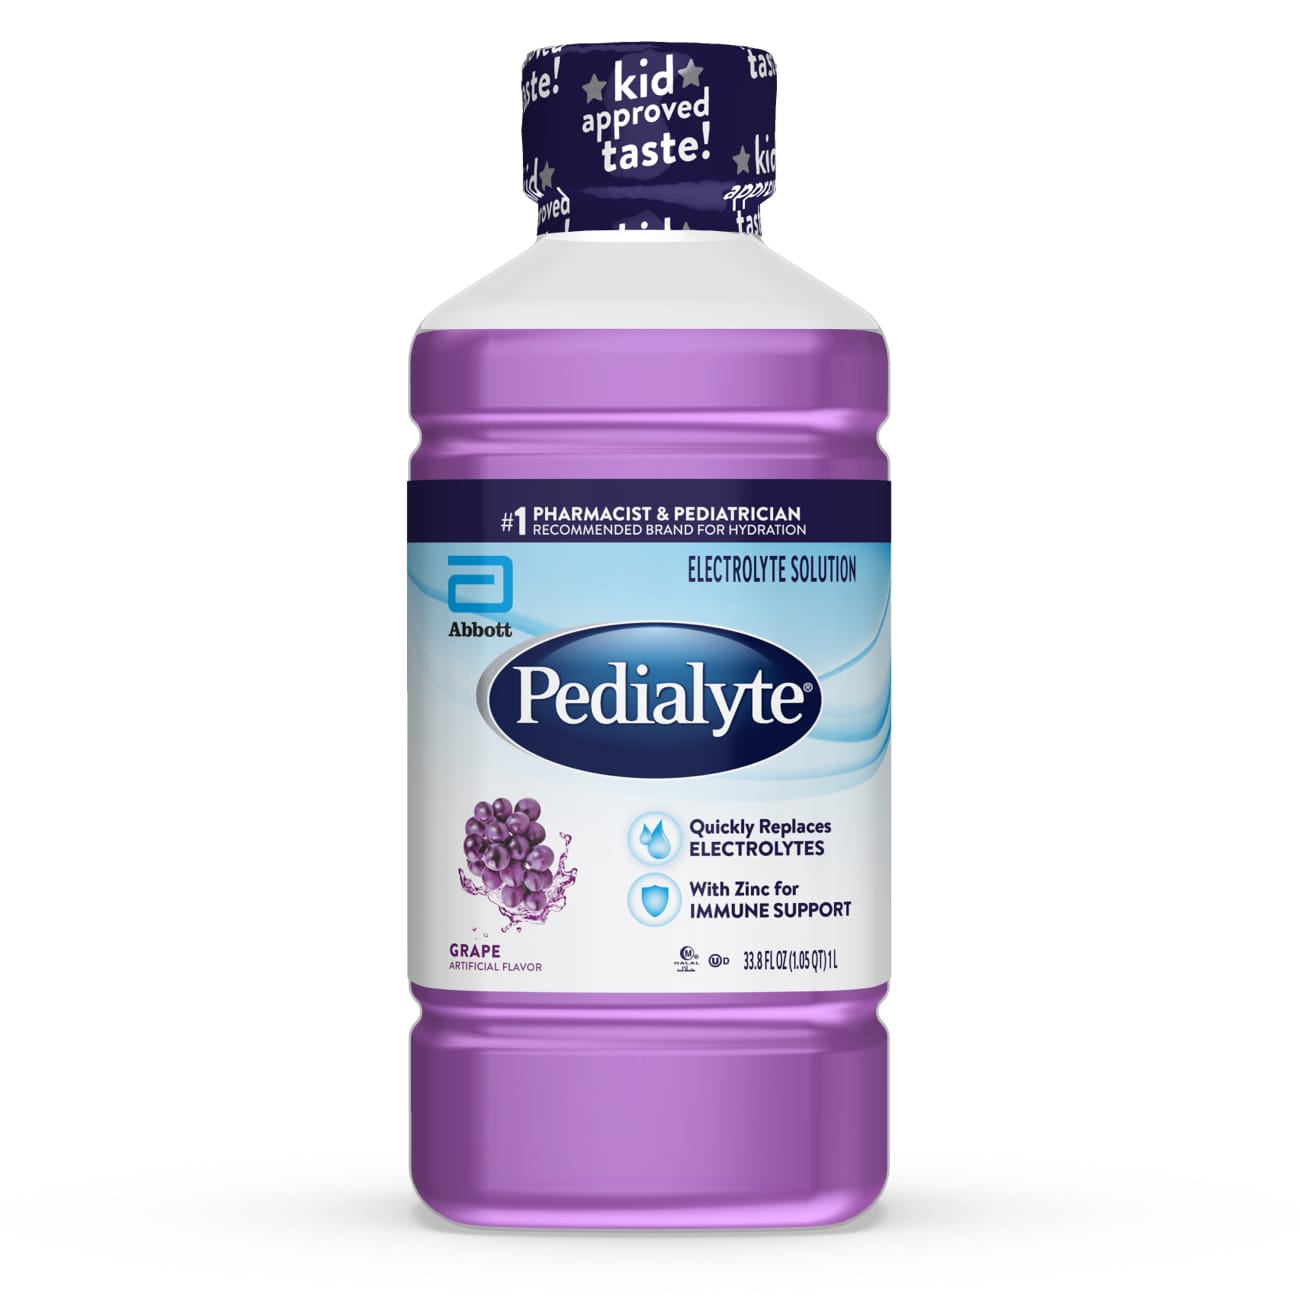 Pedialyte Electrolyte Solution Ready-to-Drink 33.8oz